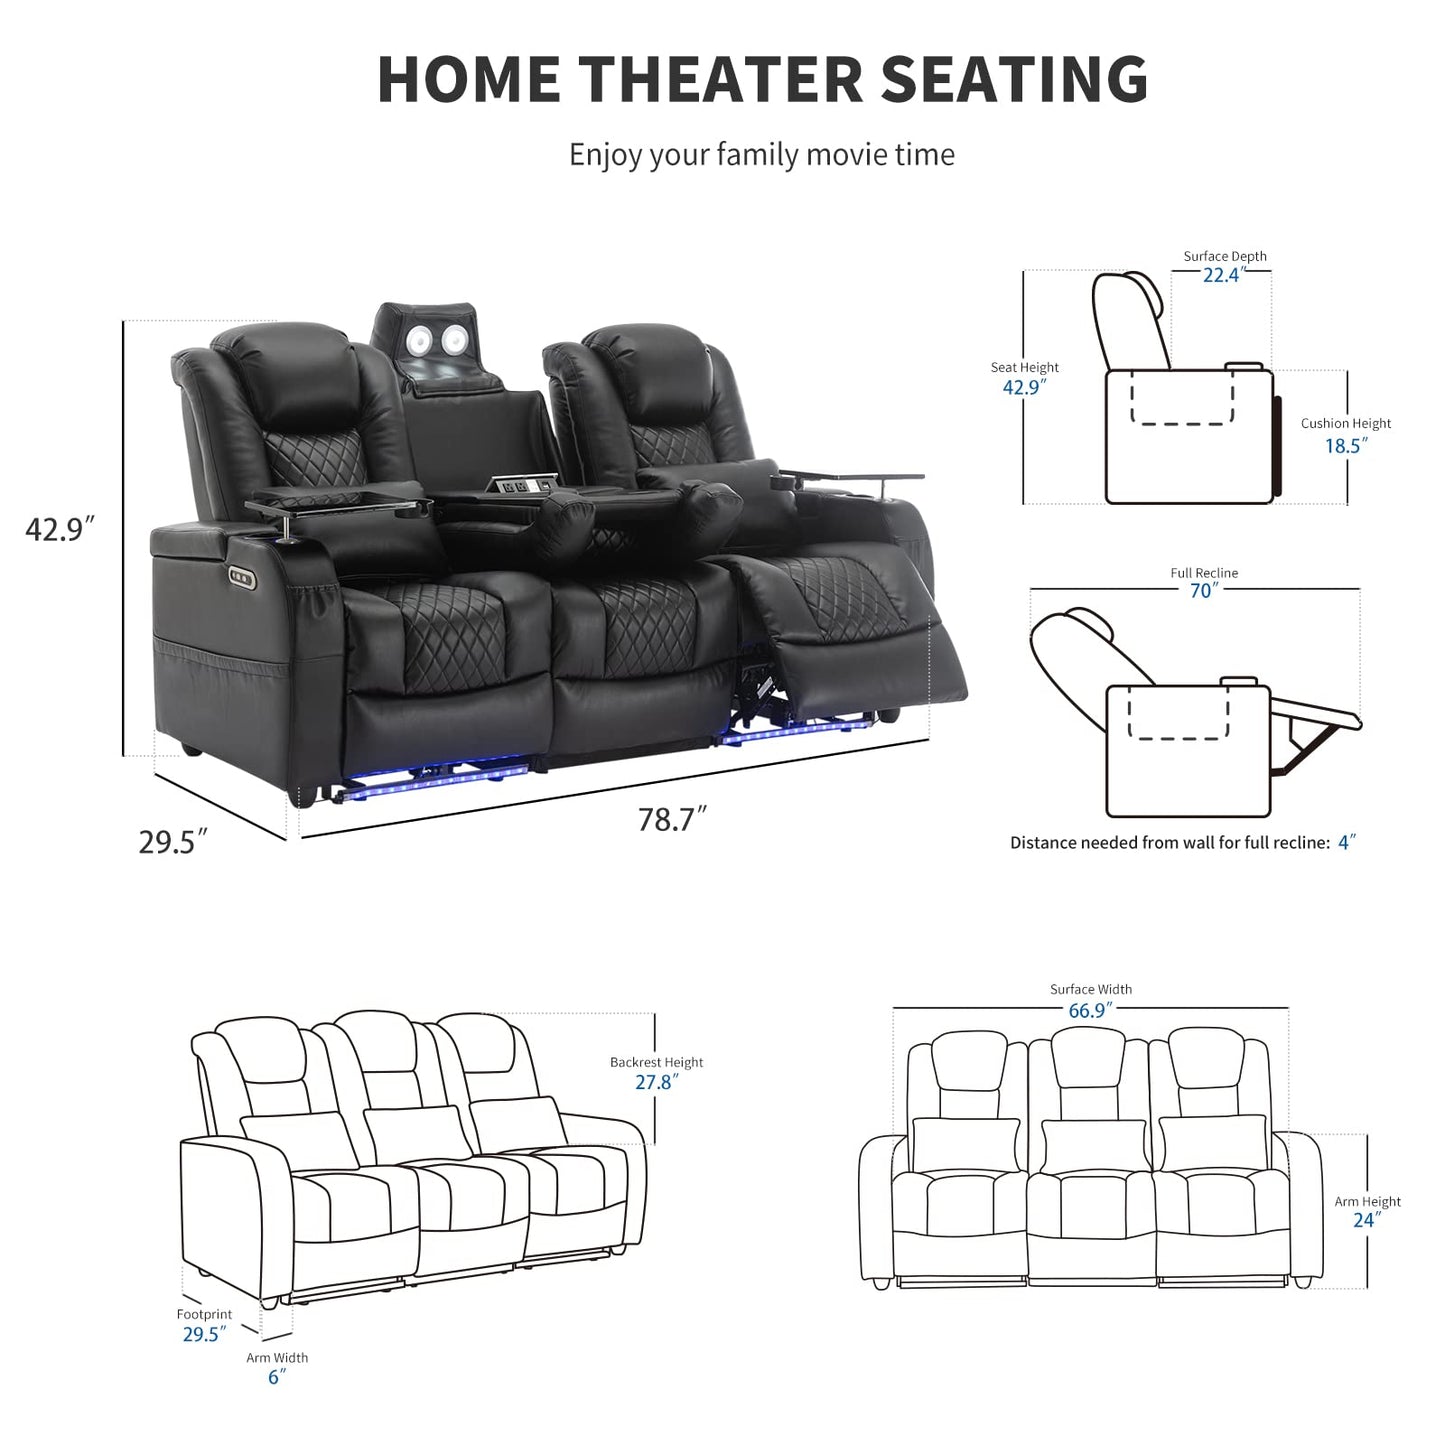 Airadlis Home Theater Seating Seats, Movie Theater Chairs Theater Recliner with 7 Colors Ambient Lighting, Lumbar Pillow, Touch Reading Lights, Tray Table (Black, Row of 3)